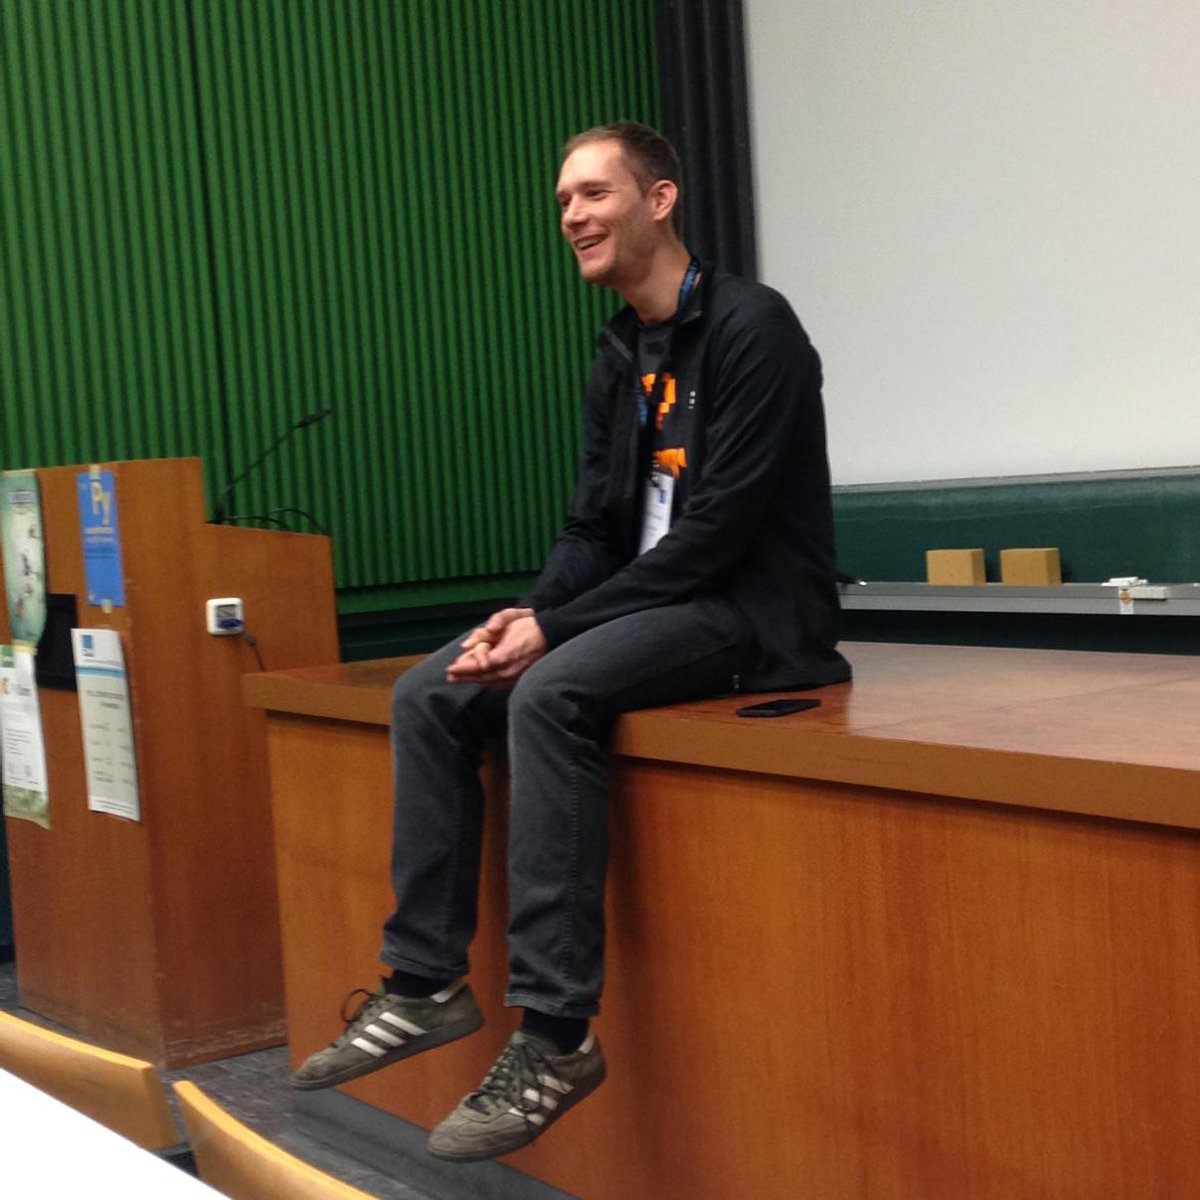 Andreas Hug from @OTS_BLN leading a discussion at #pyunconf on learning and teaching #Python